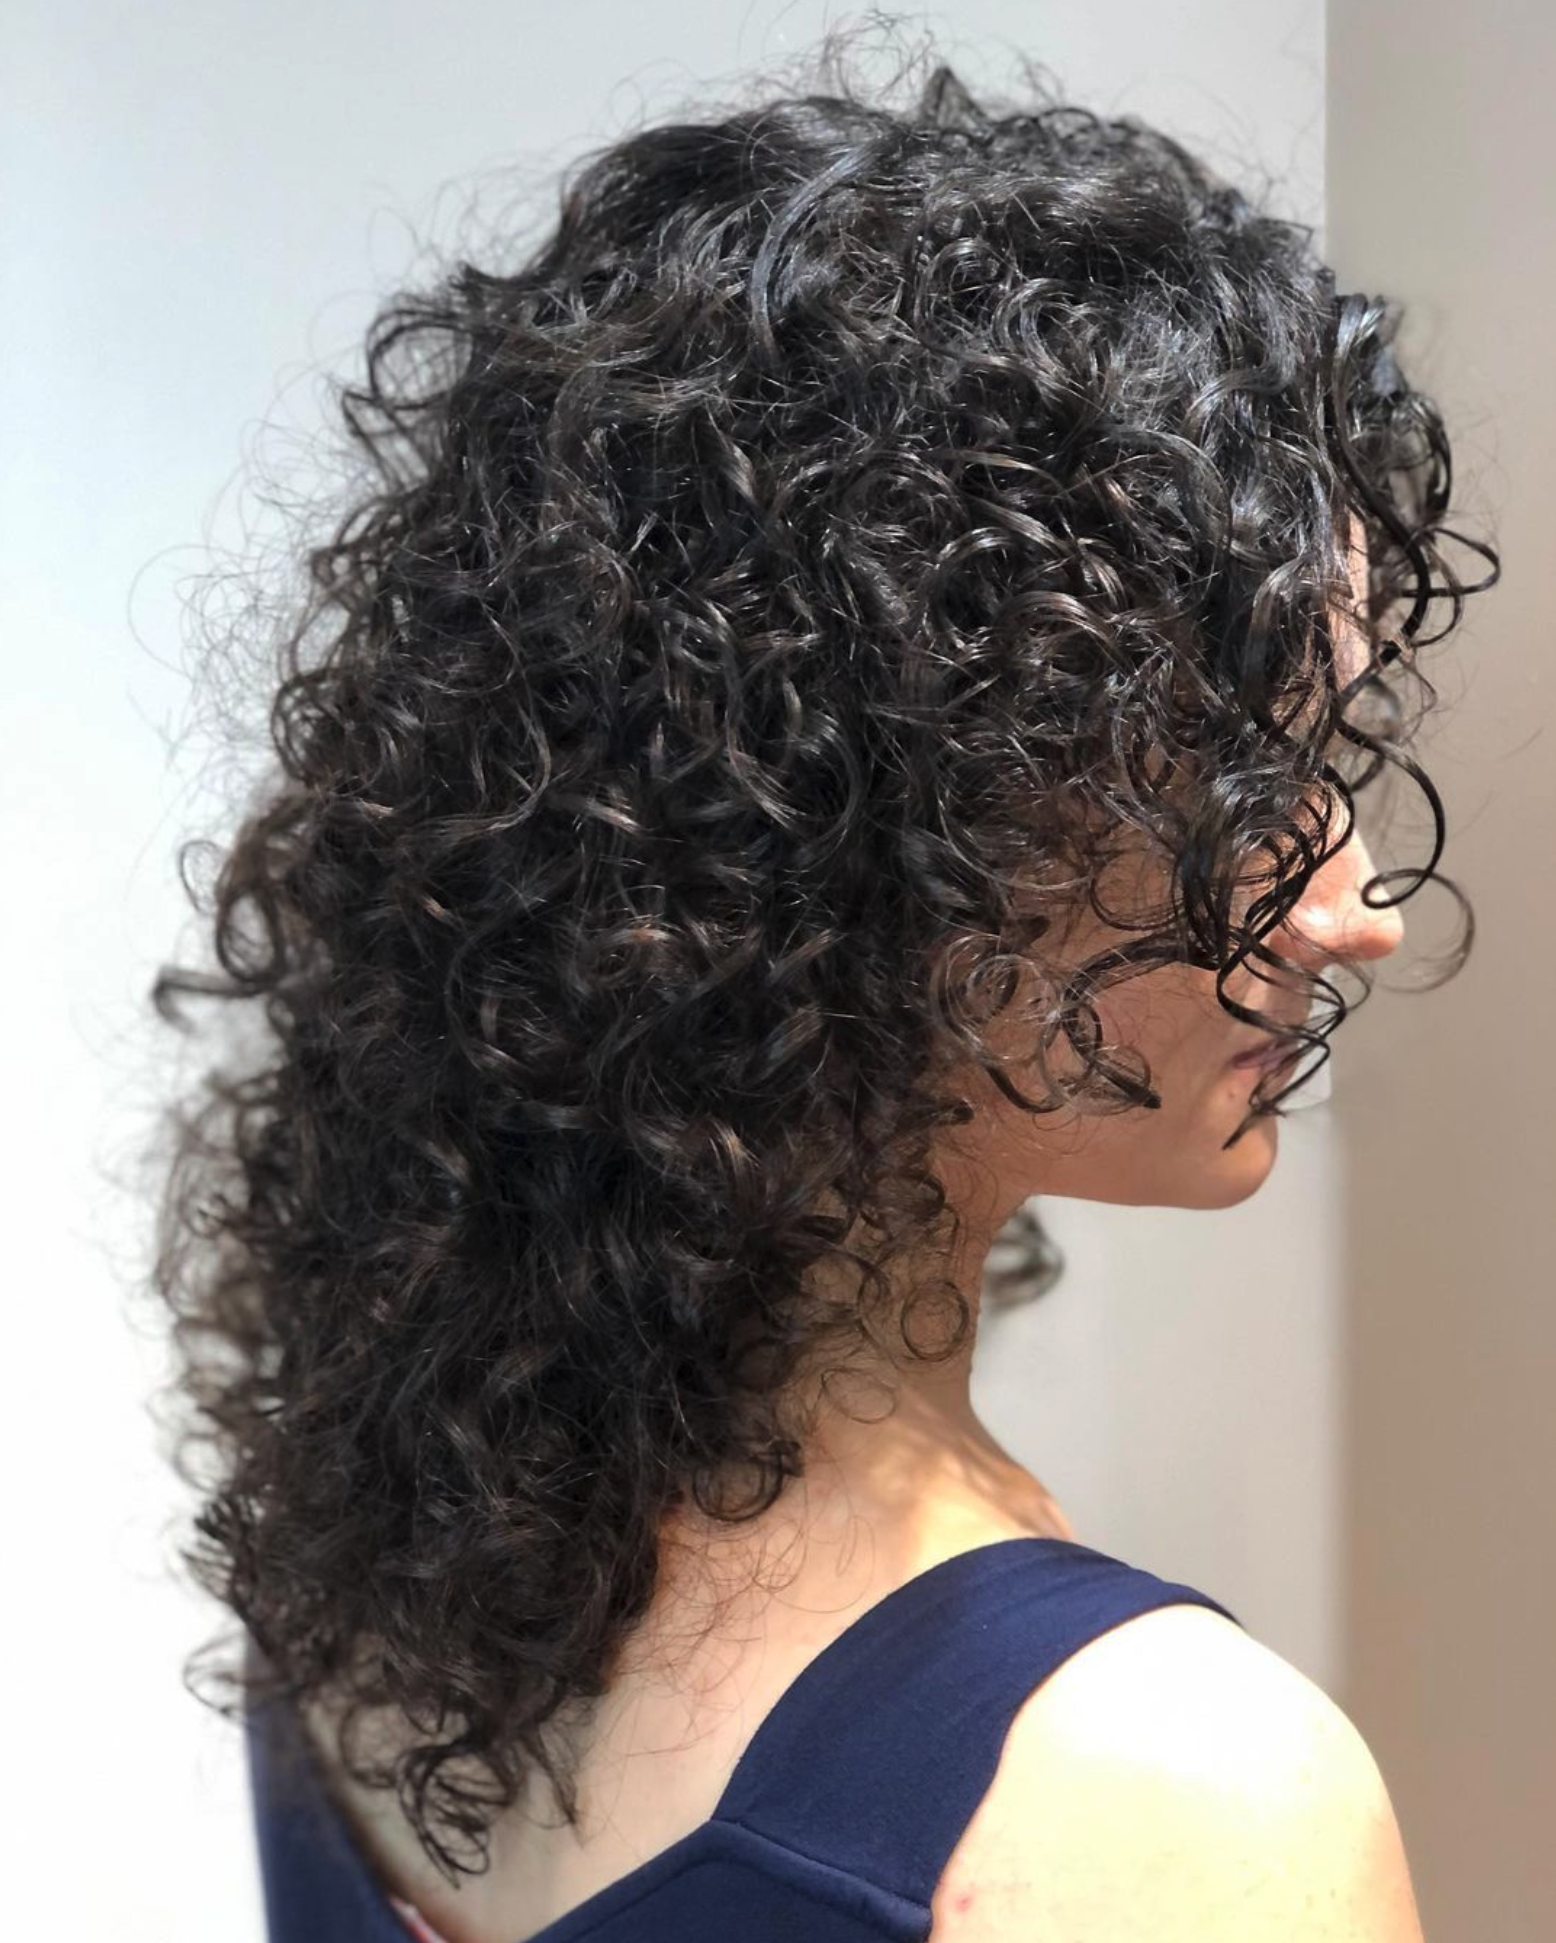 Curly Hair Salon Vancouver